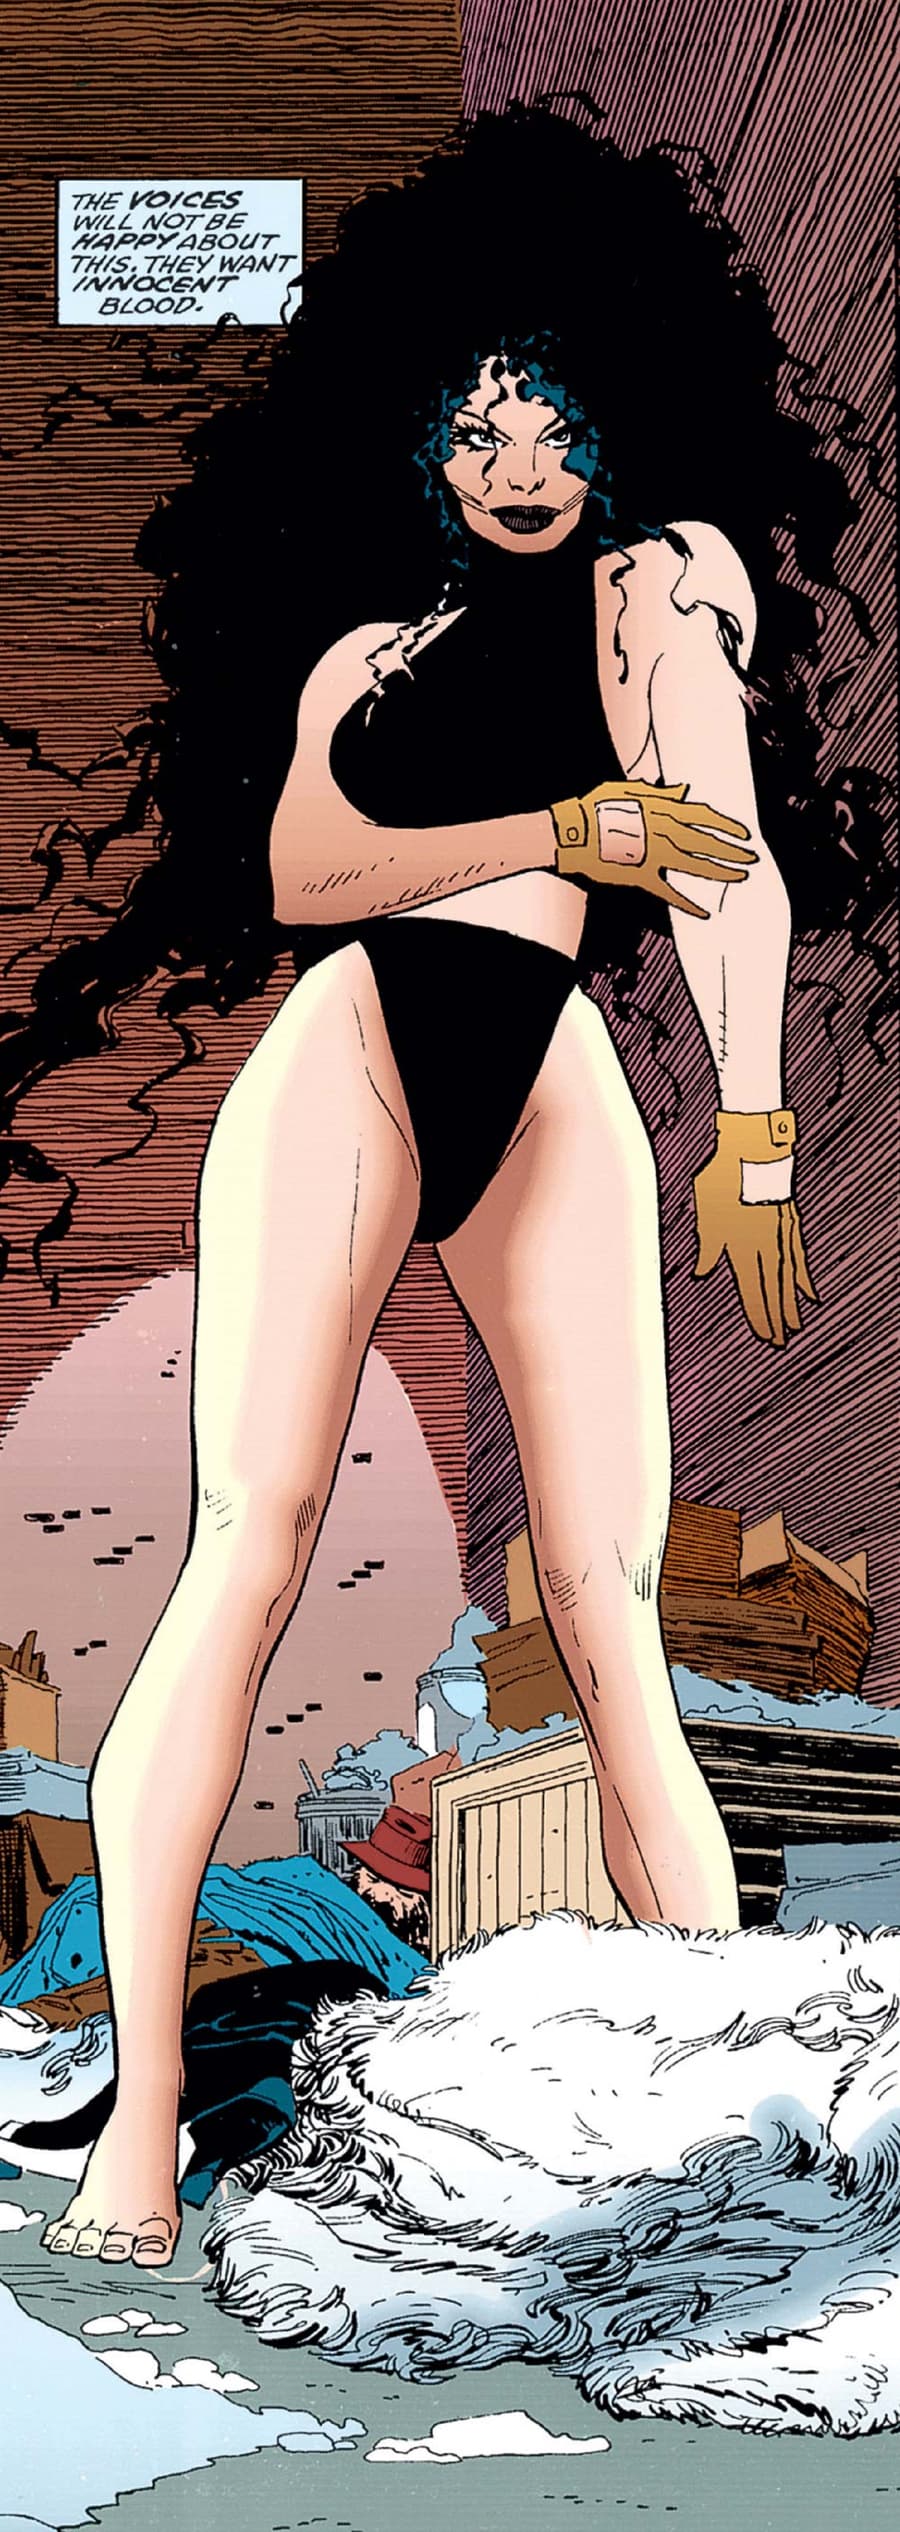 Elektra gets ready to fight in a two-piece black ensemble.